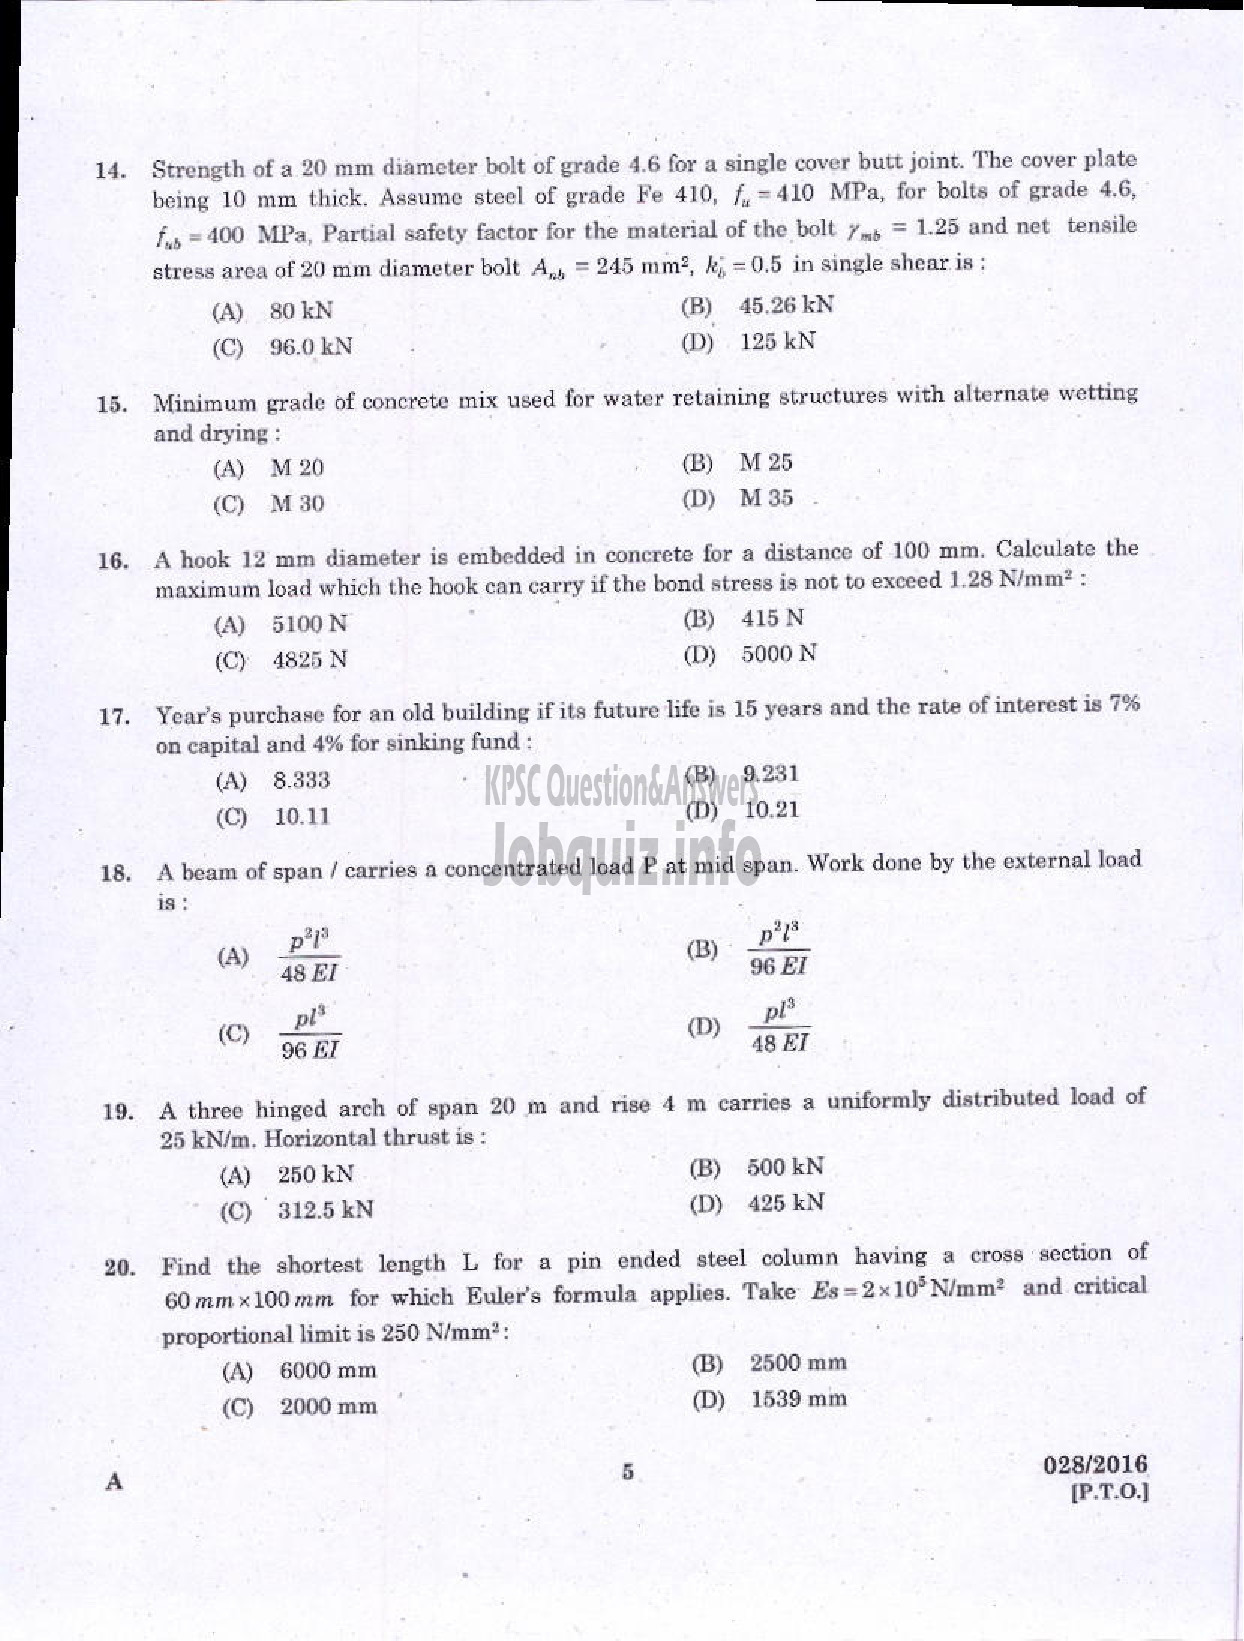 Kerala PSC Question Paper - ASSISTANT ENGINEER DIRECT/BY TRANSFER KERALA WATER AUTHORITY-3